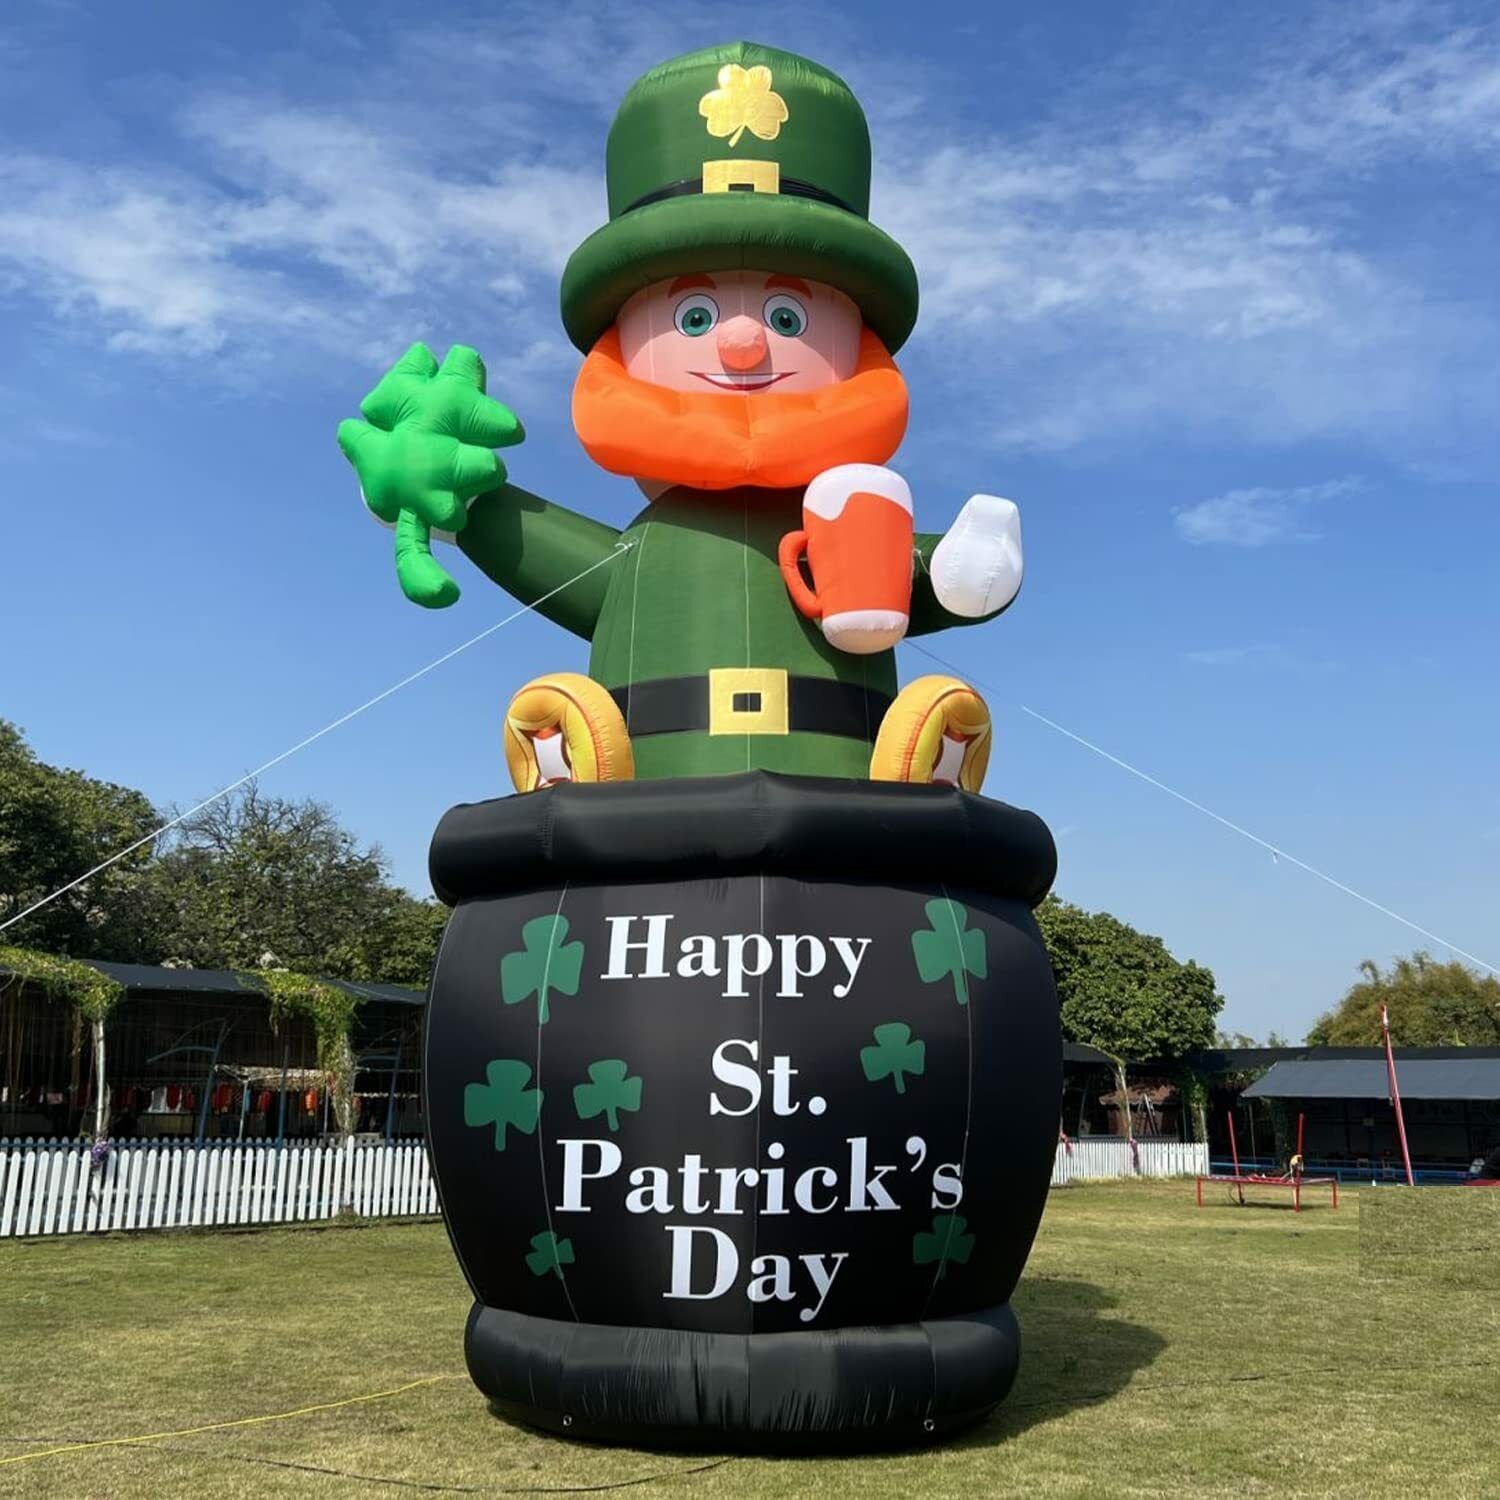 WARSUN Giant 26FT St Patricks Day Inflatables Outdoor Decorations Business Decor